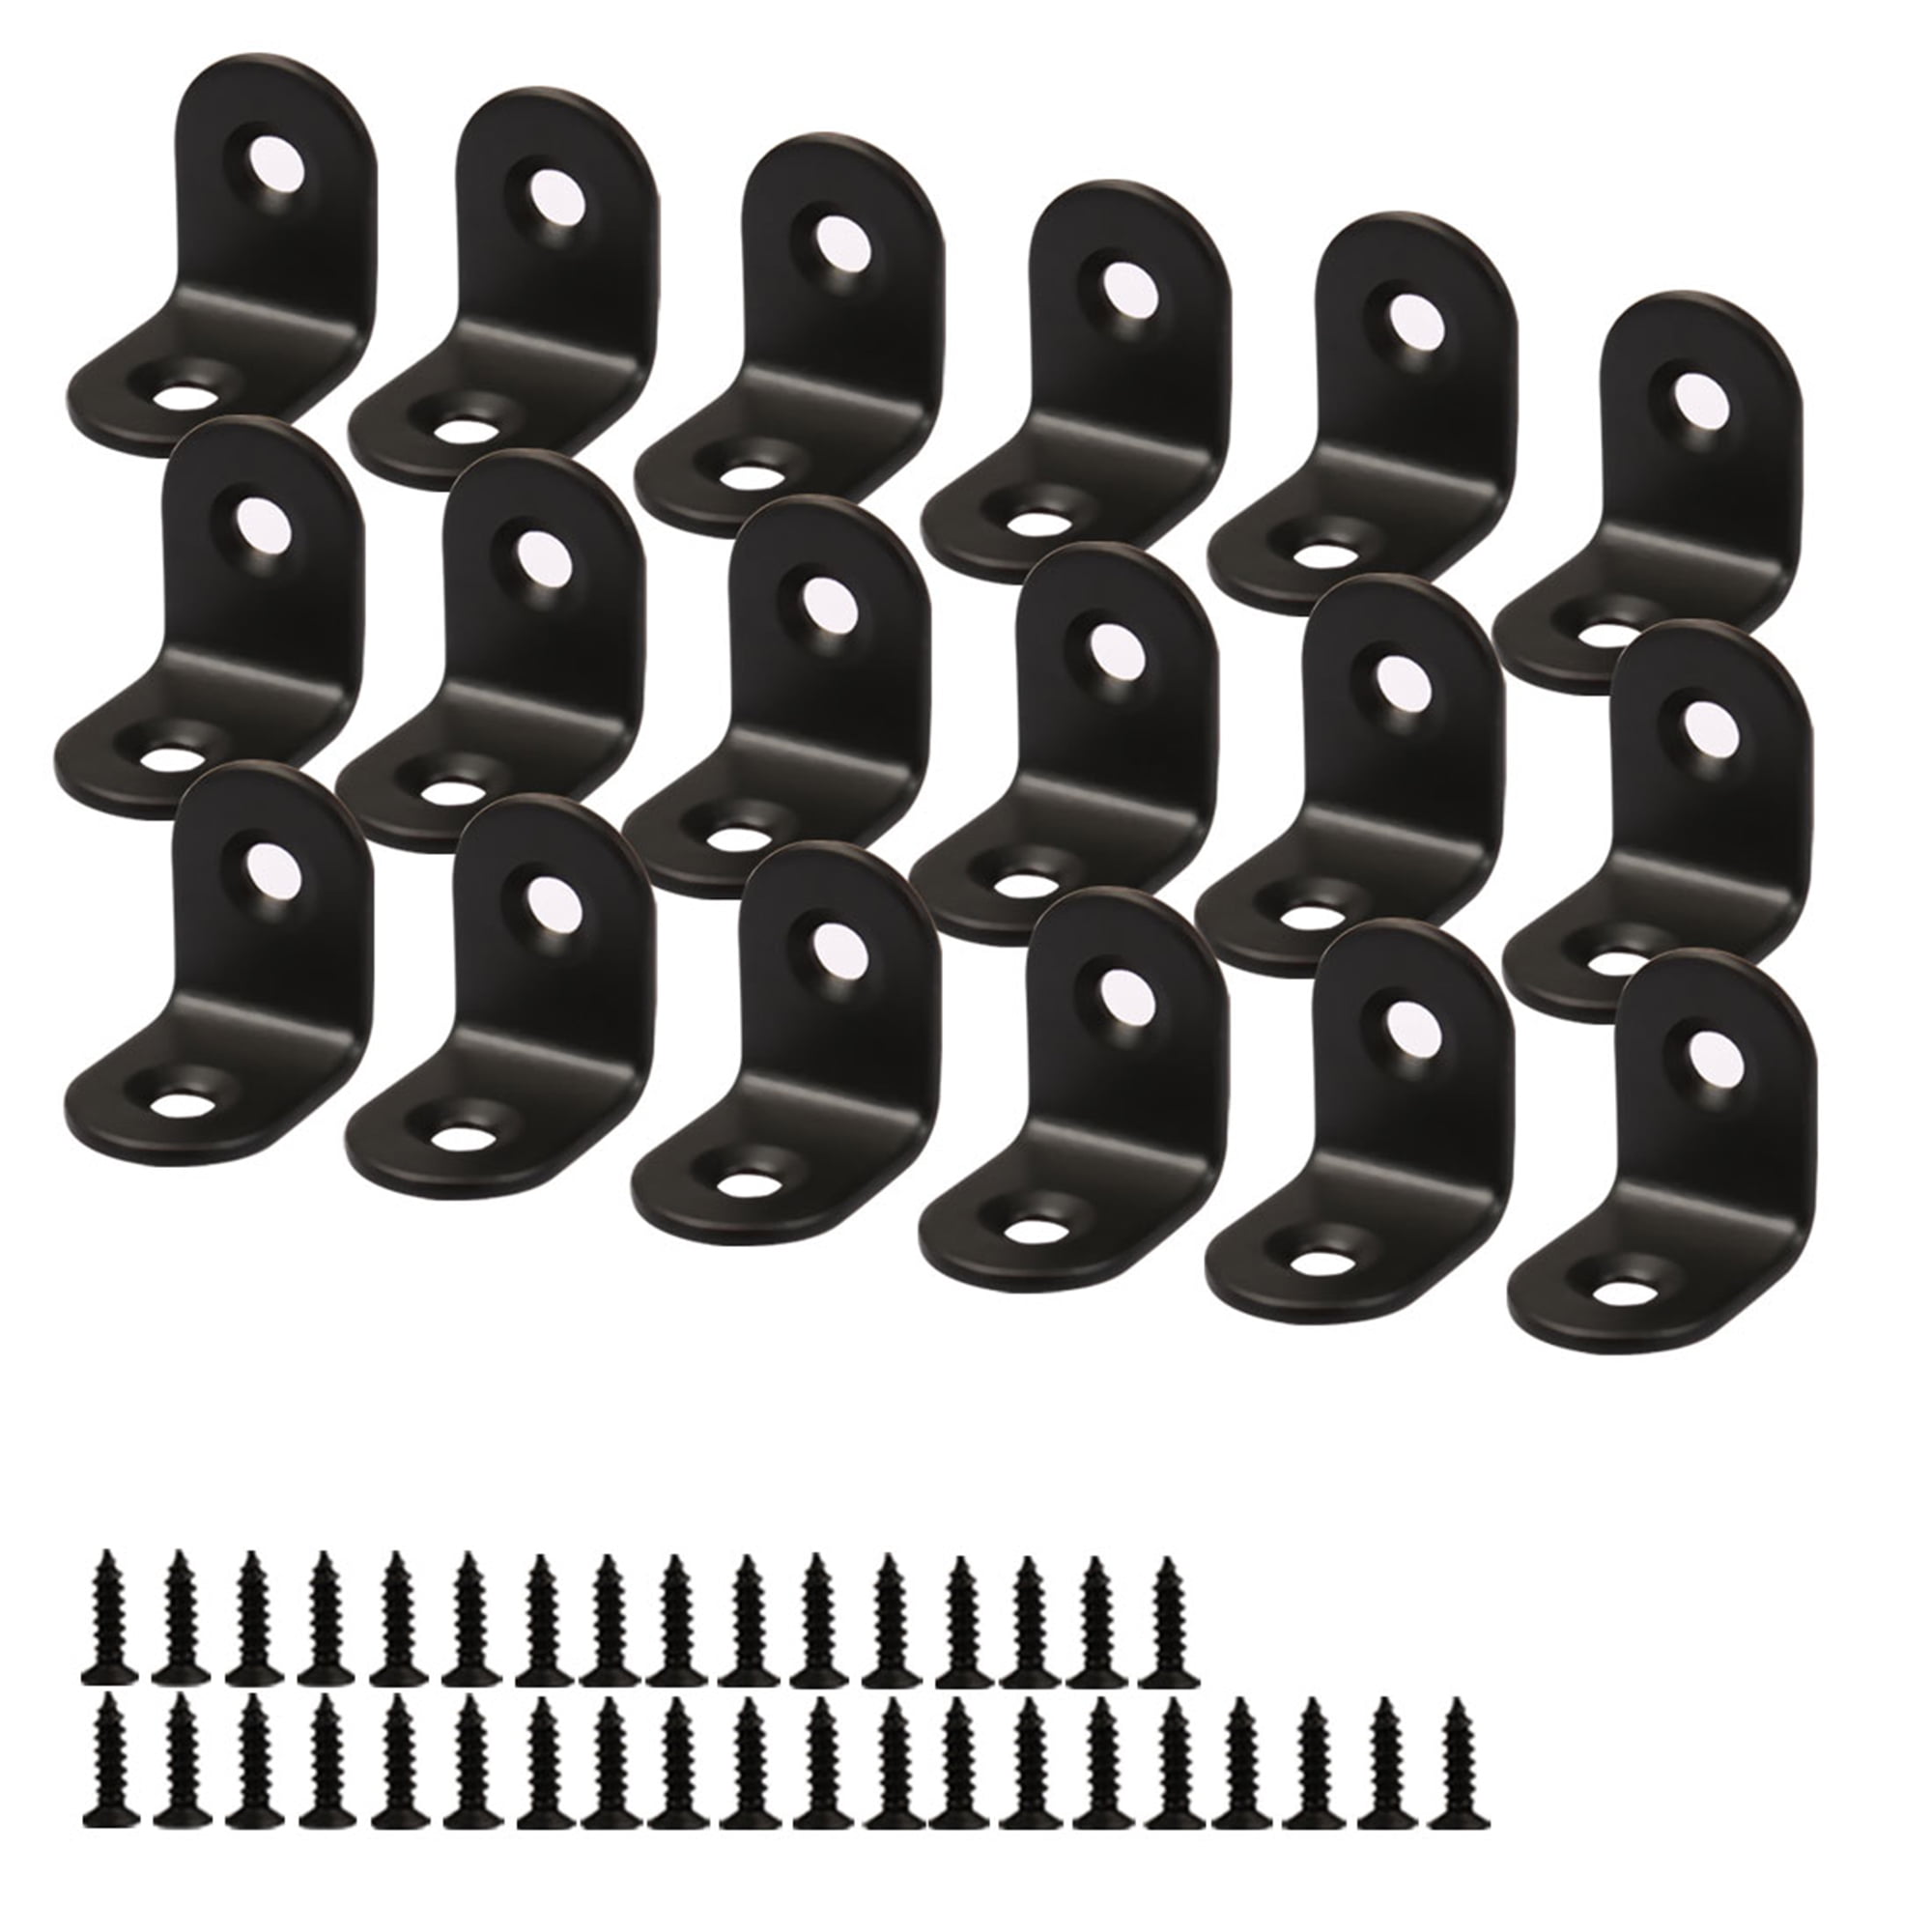 Furniture 90 Degree Corner Braces 20 x 20 mm Cabinet 20 Pieces Right Angle Brackets Fasteners L Shaped Corner Bracket with 40 Pieces Screws for Wood Shelves